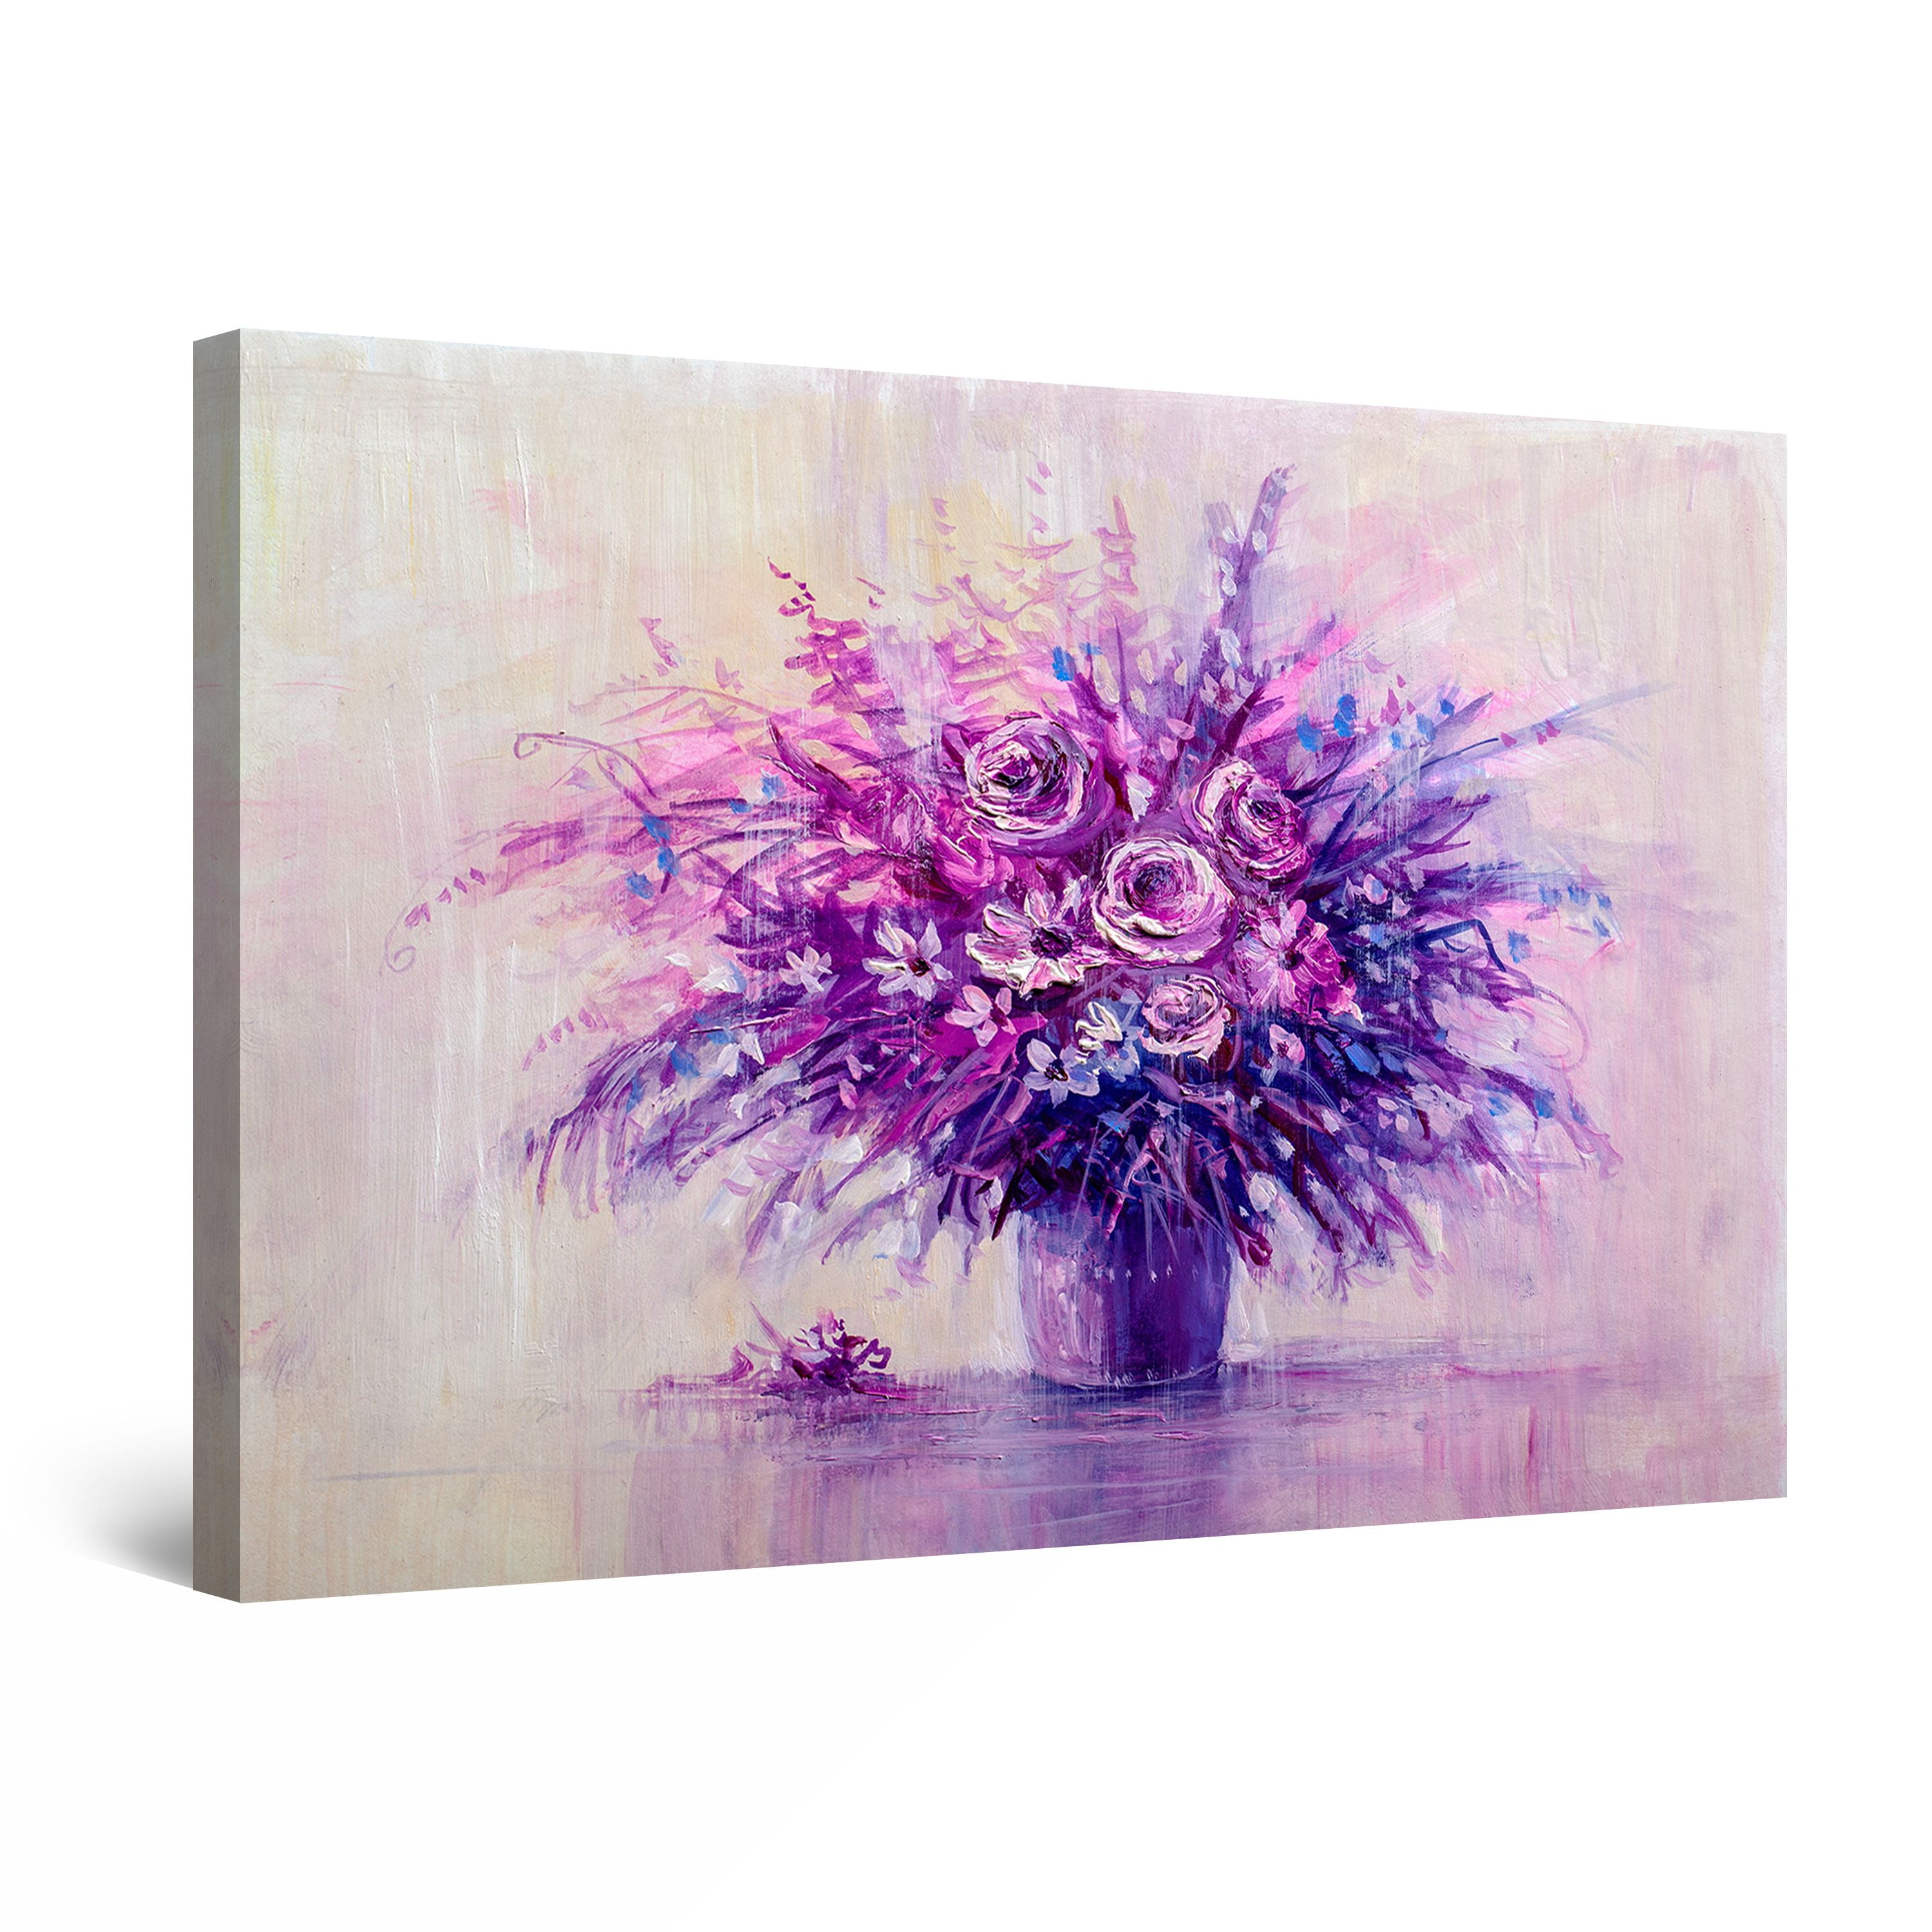 Startonight Canvas Wall Art Abstract - Yellow Flowers In Purple Vase Painting - Large Artwork Print For Living Room 32" X 48" - Walmart.com